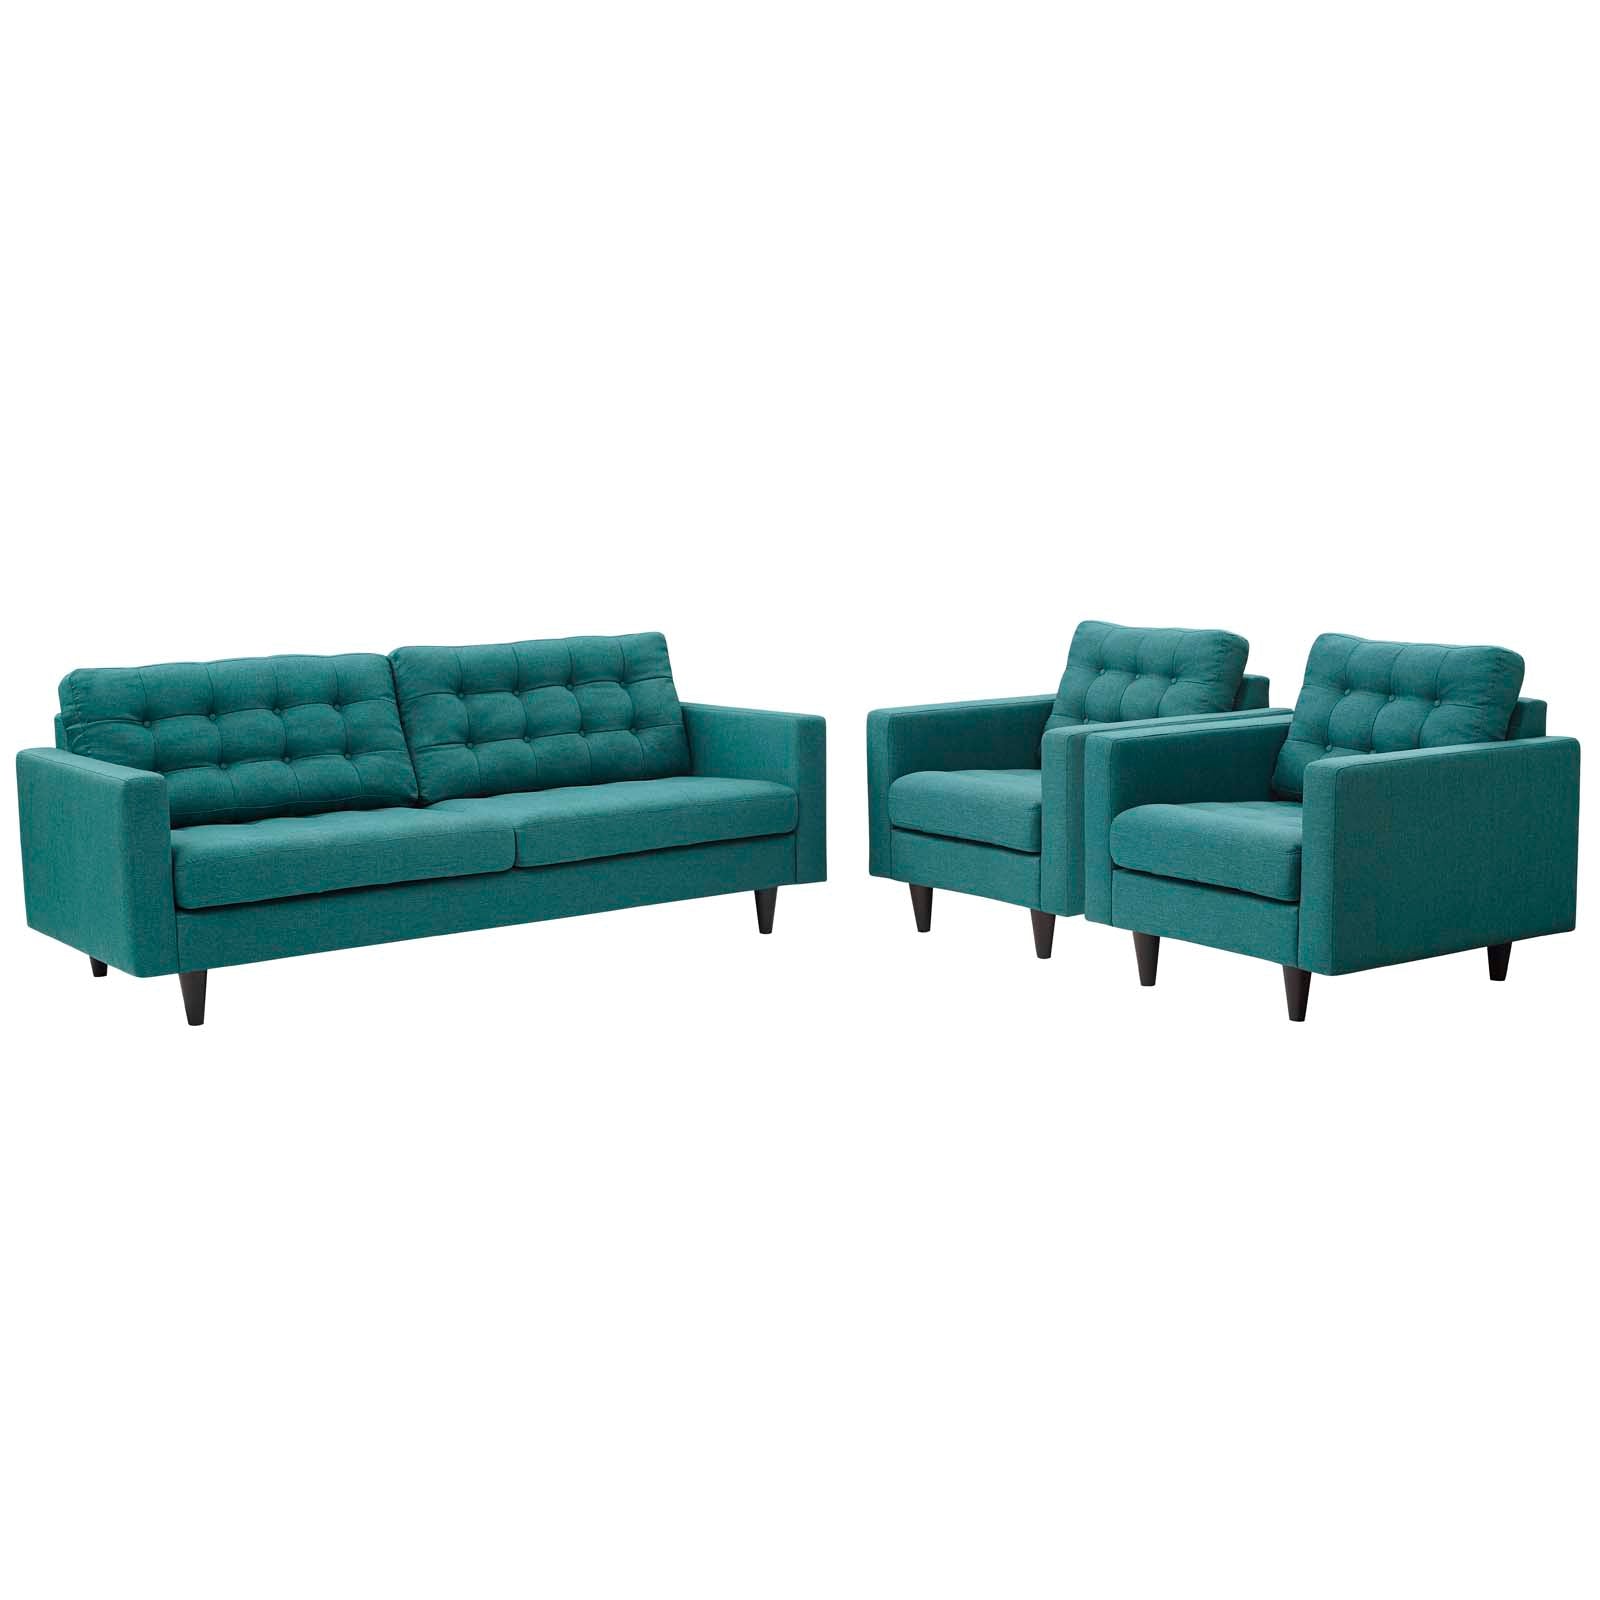 Modway Living Room Sets - Empress Sofa And Armchairs Set Of 3 Teal